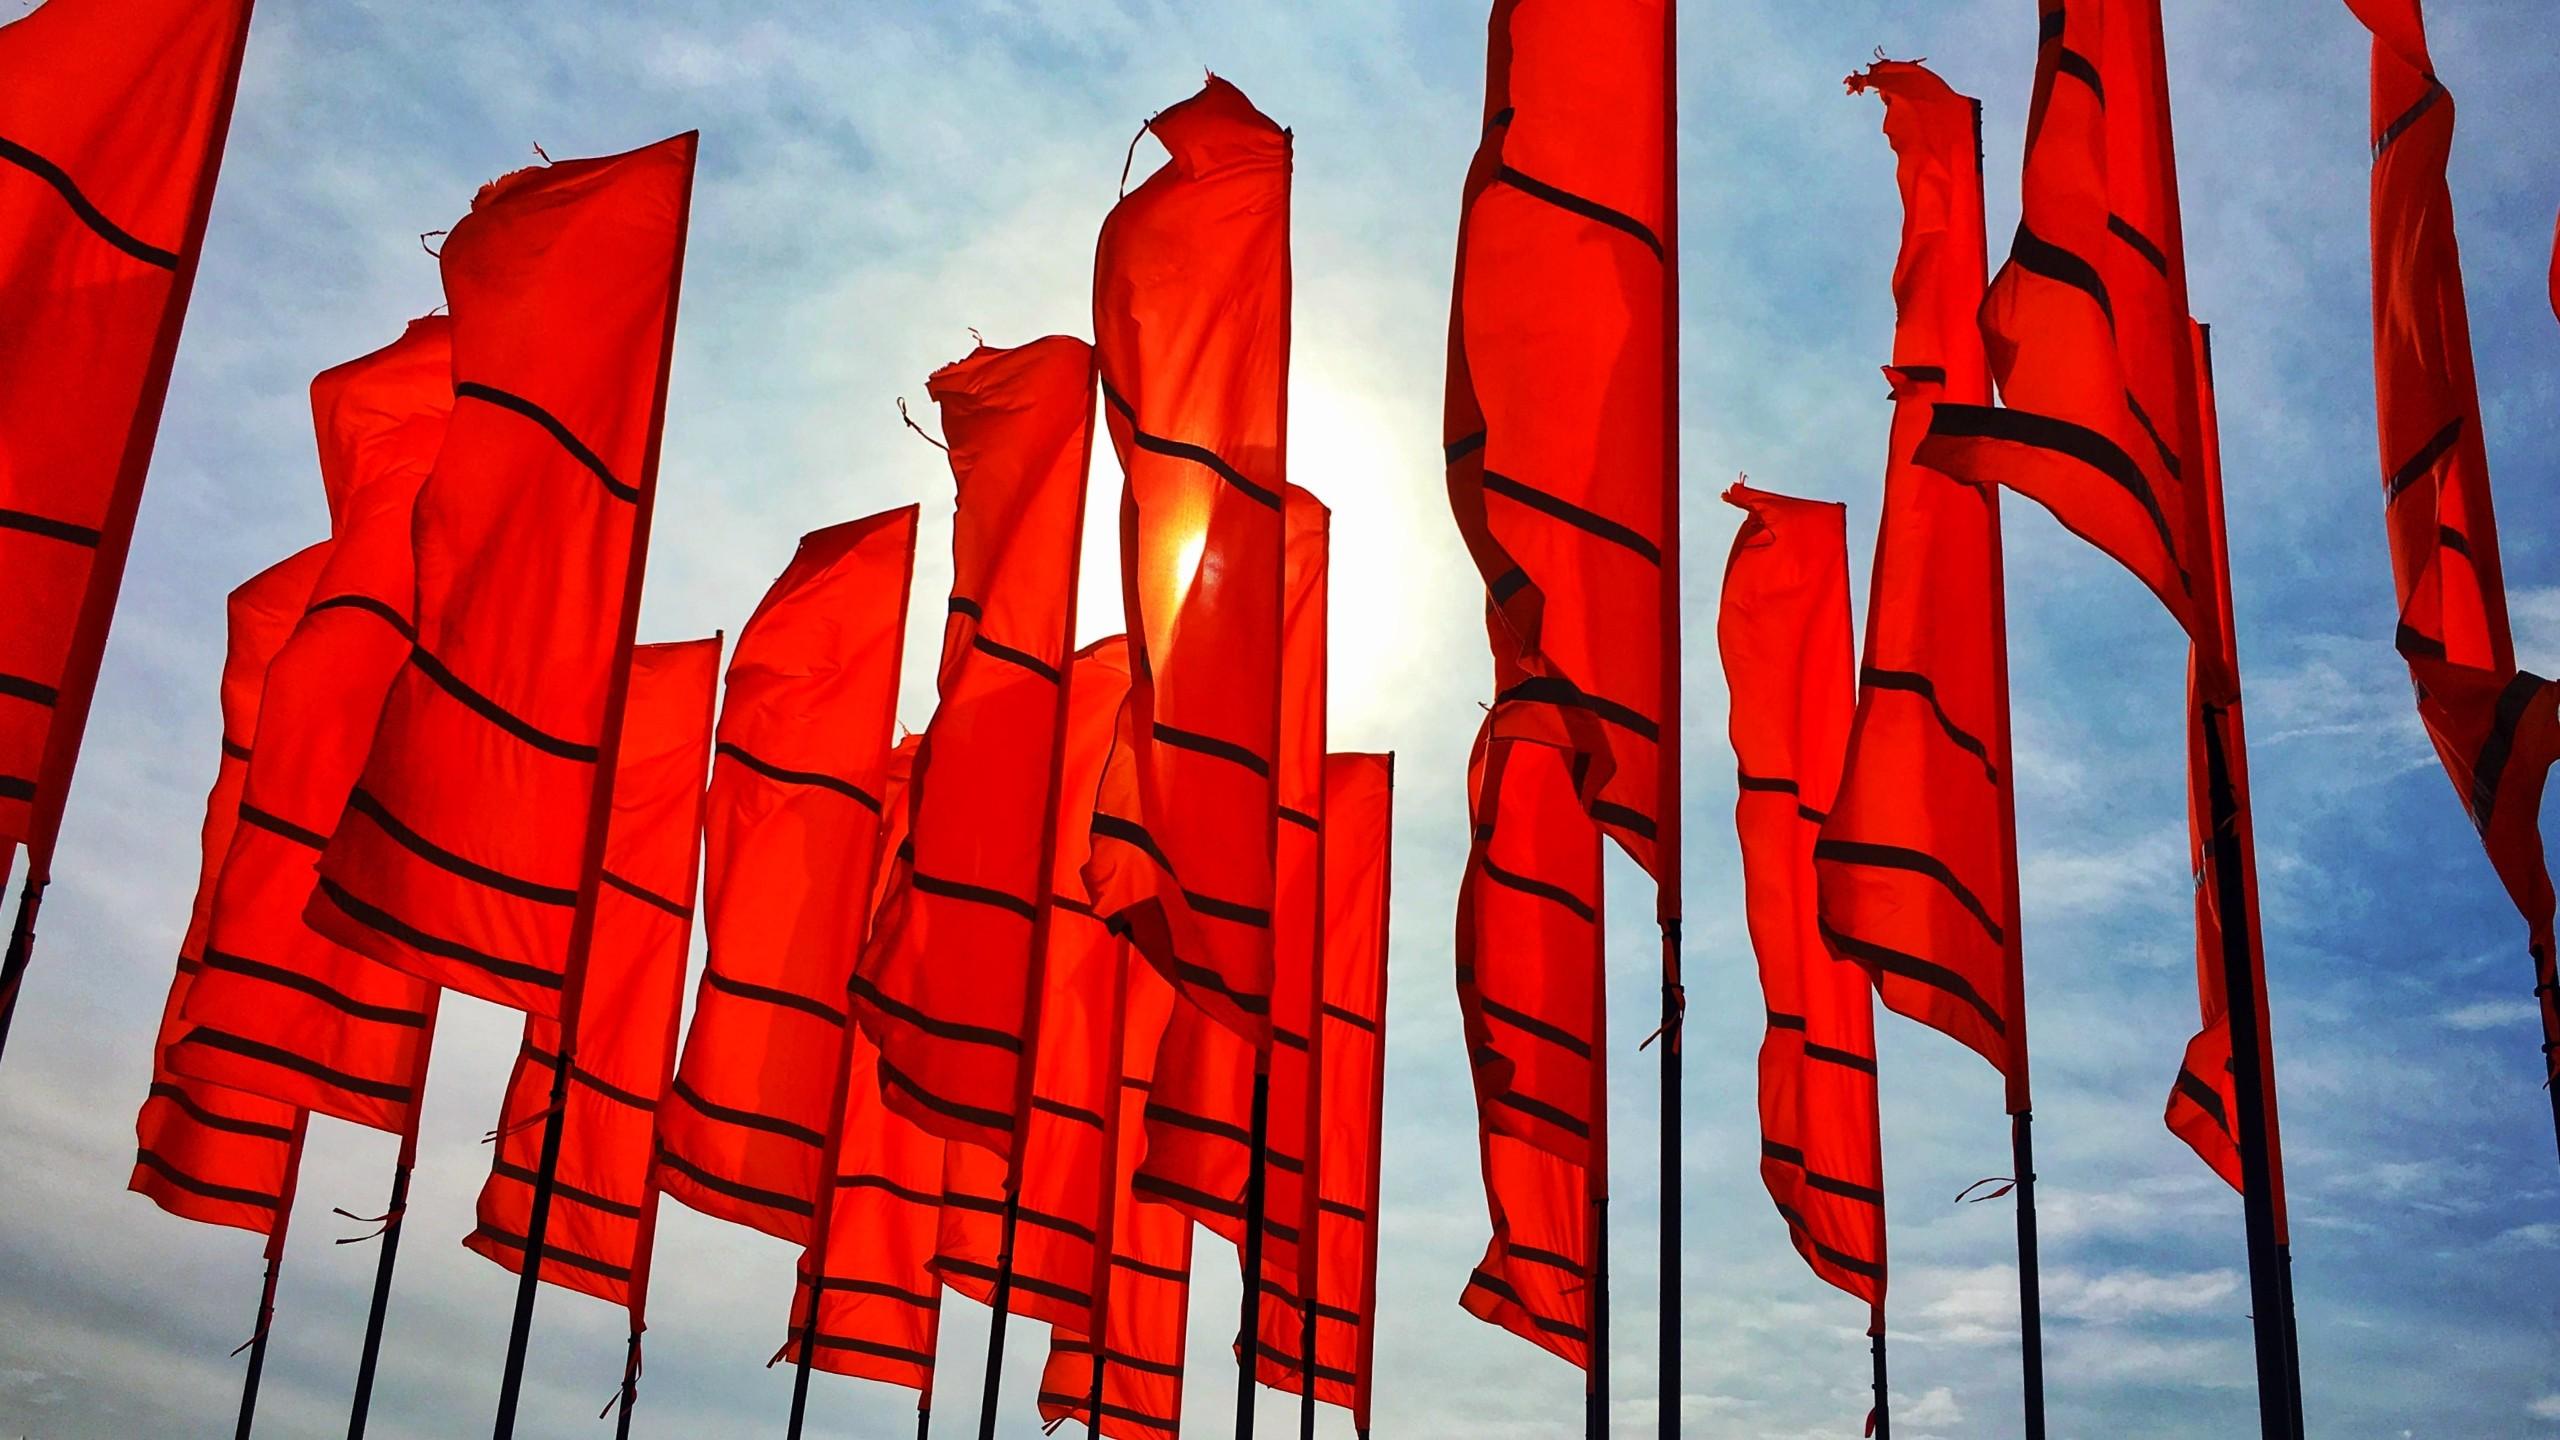 Image of several red flags against a blue sky